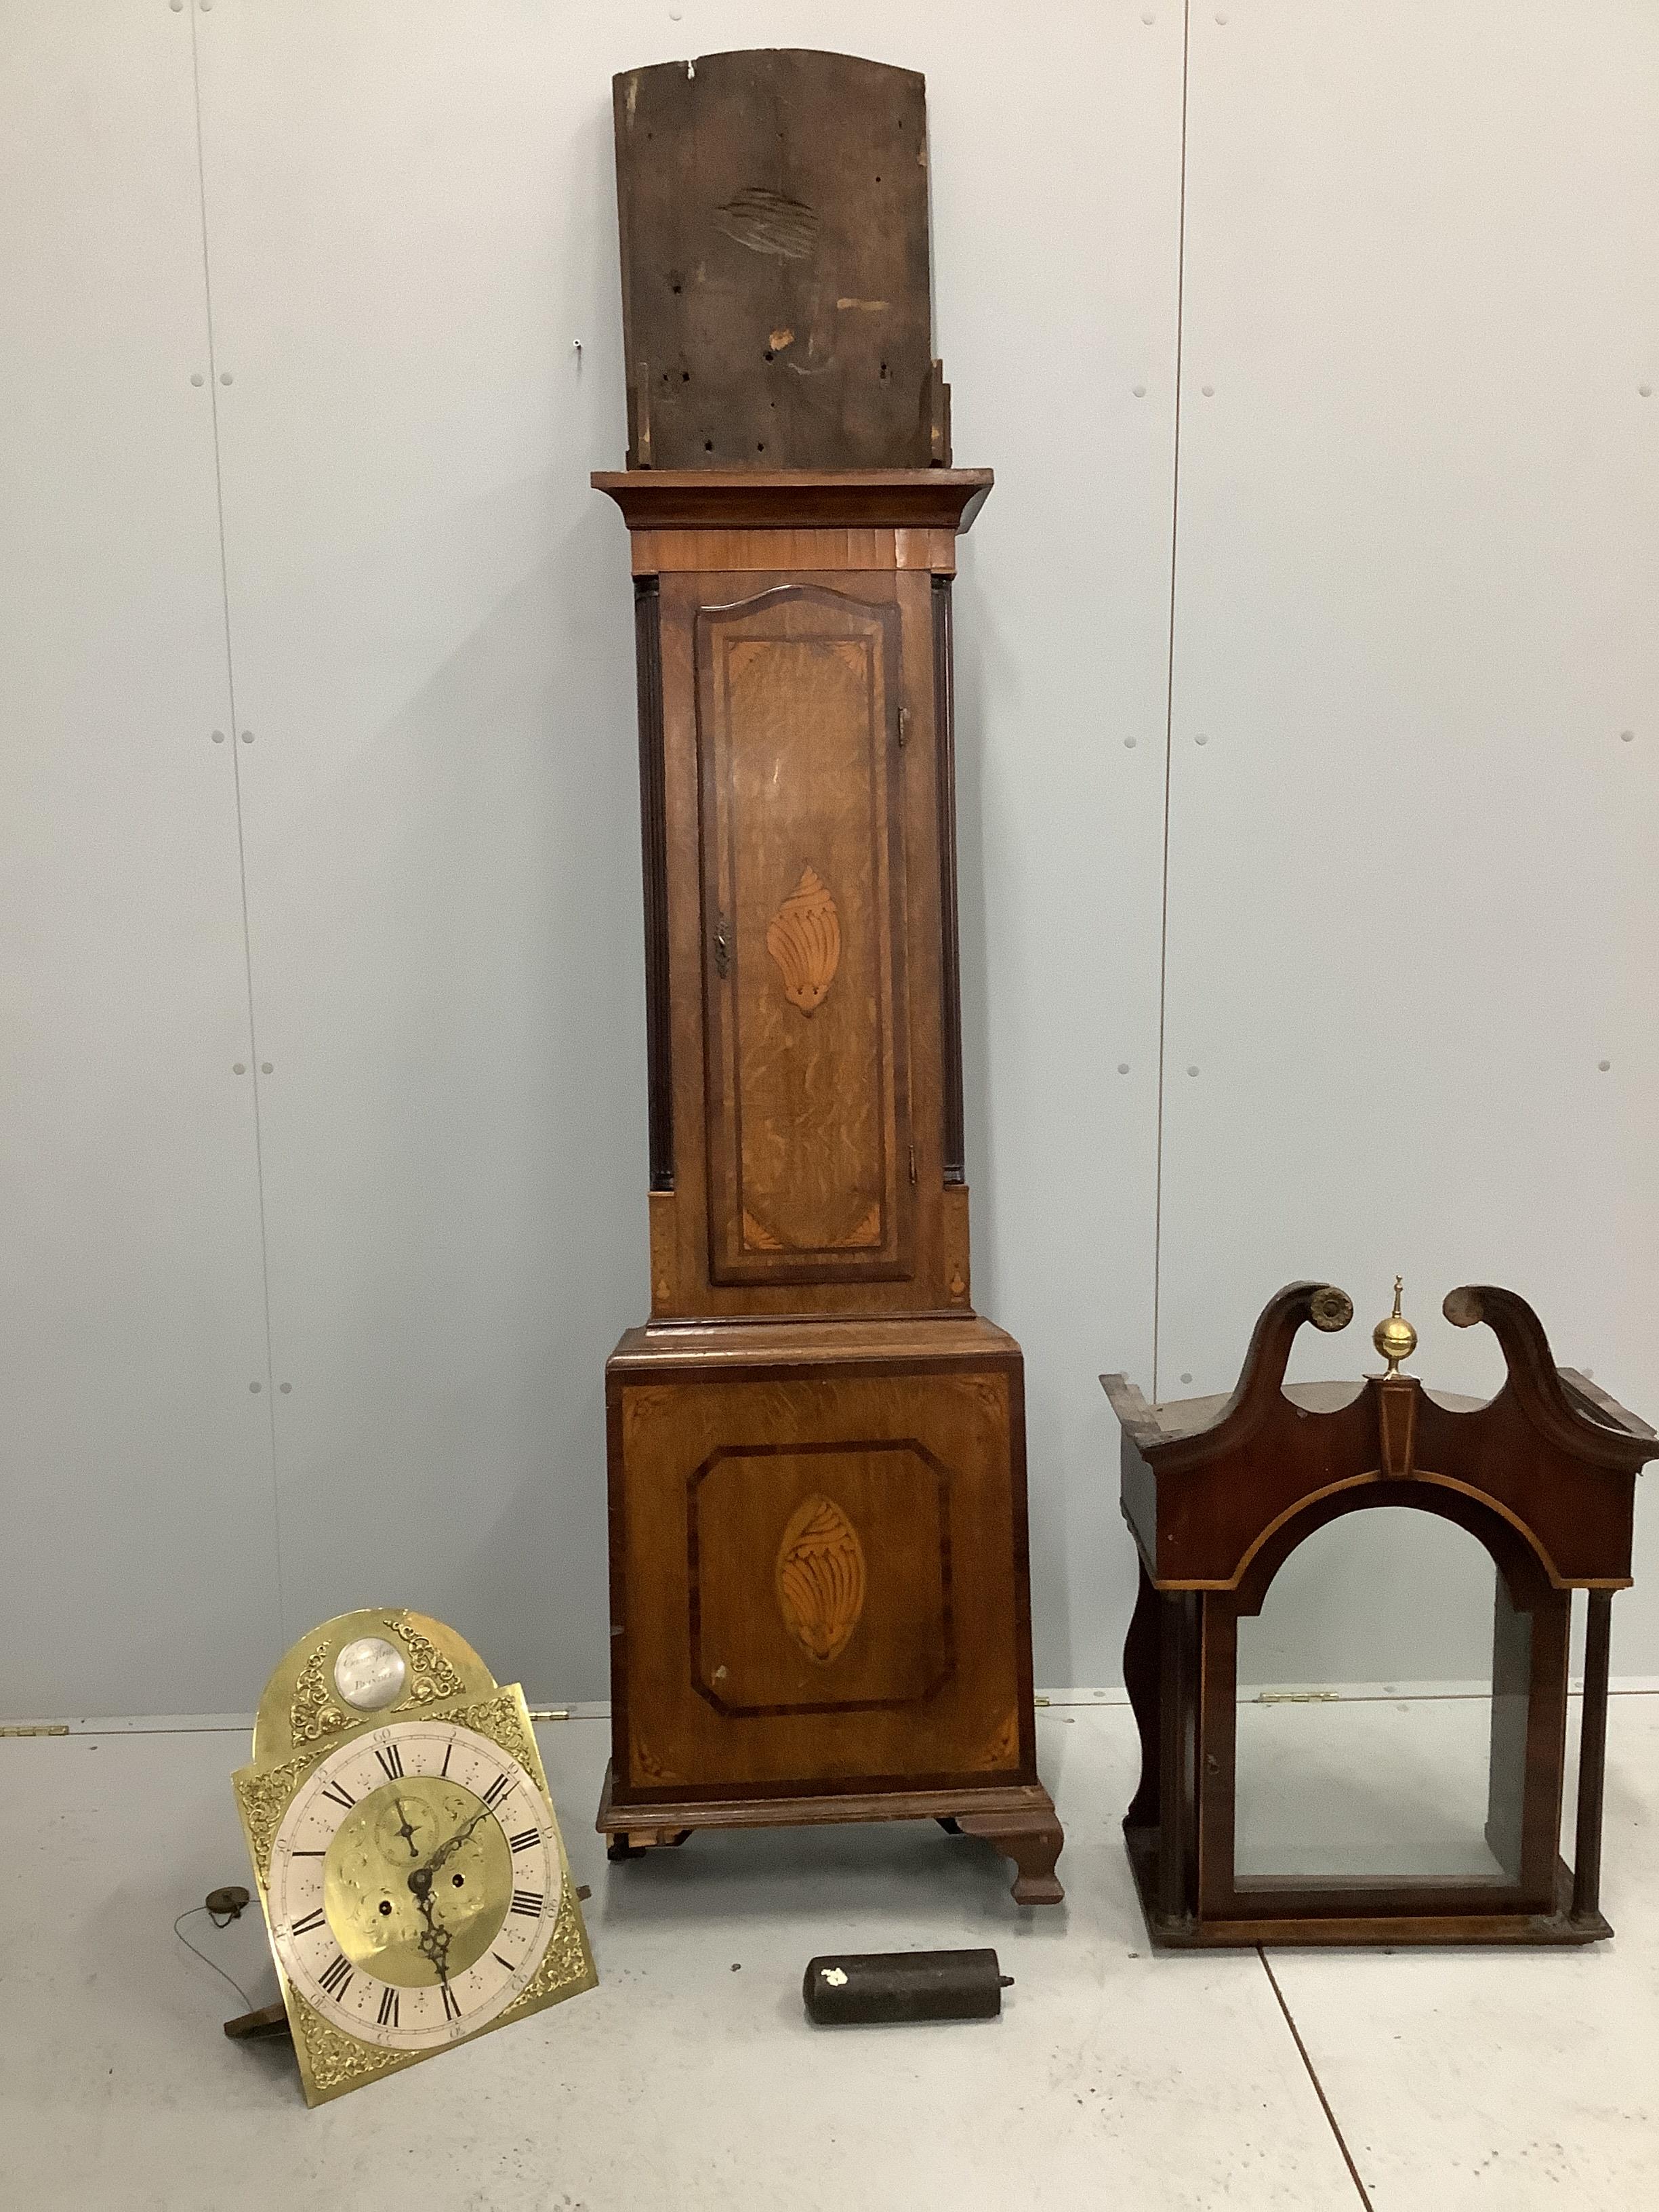 An early 19th century inlaid oak eight day longcase clock, marked Edward Heys, Brindle, in need of restoration, missing a weight and pendulum, height 232cm